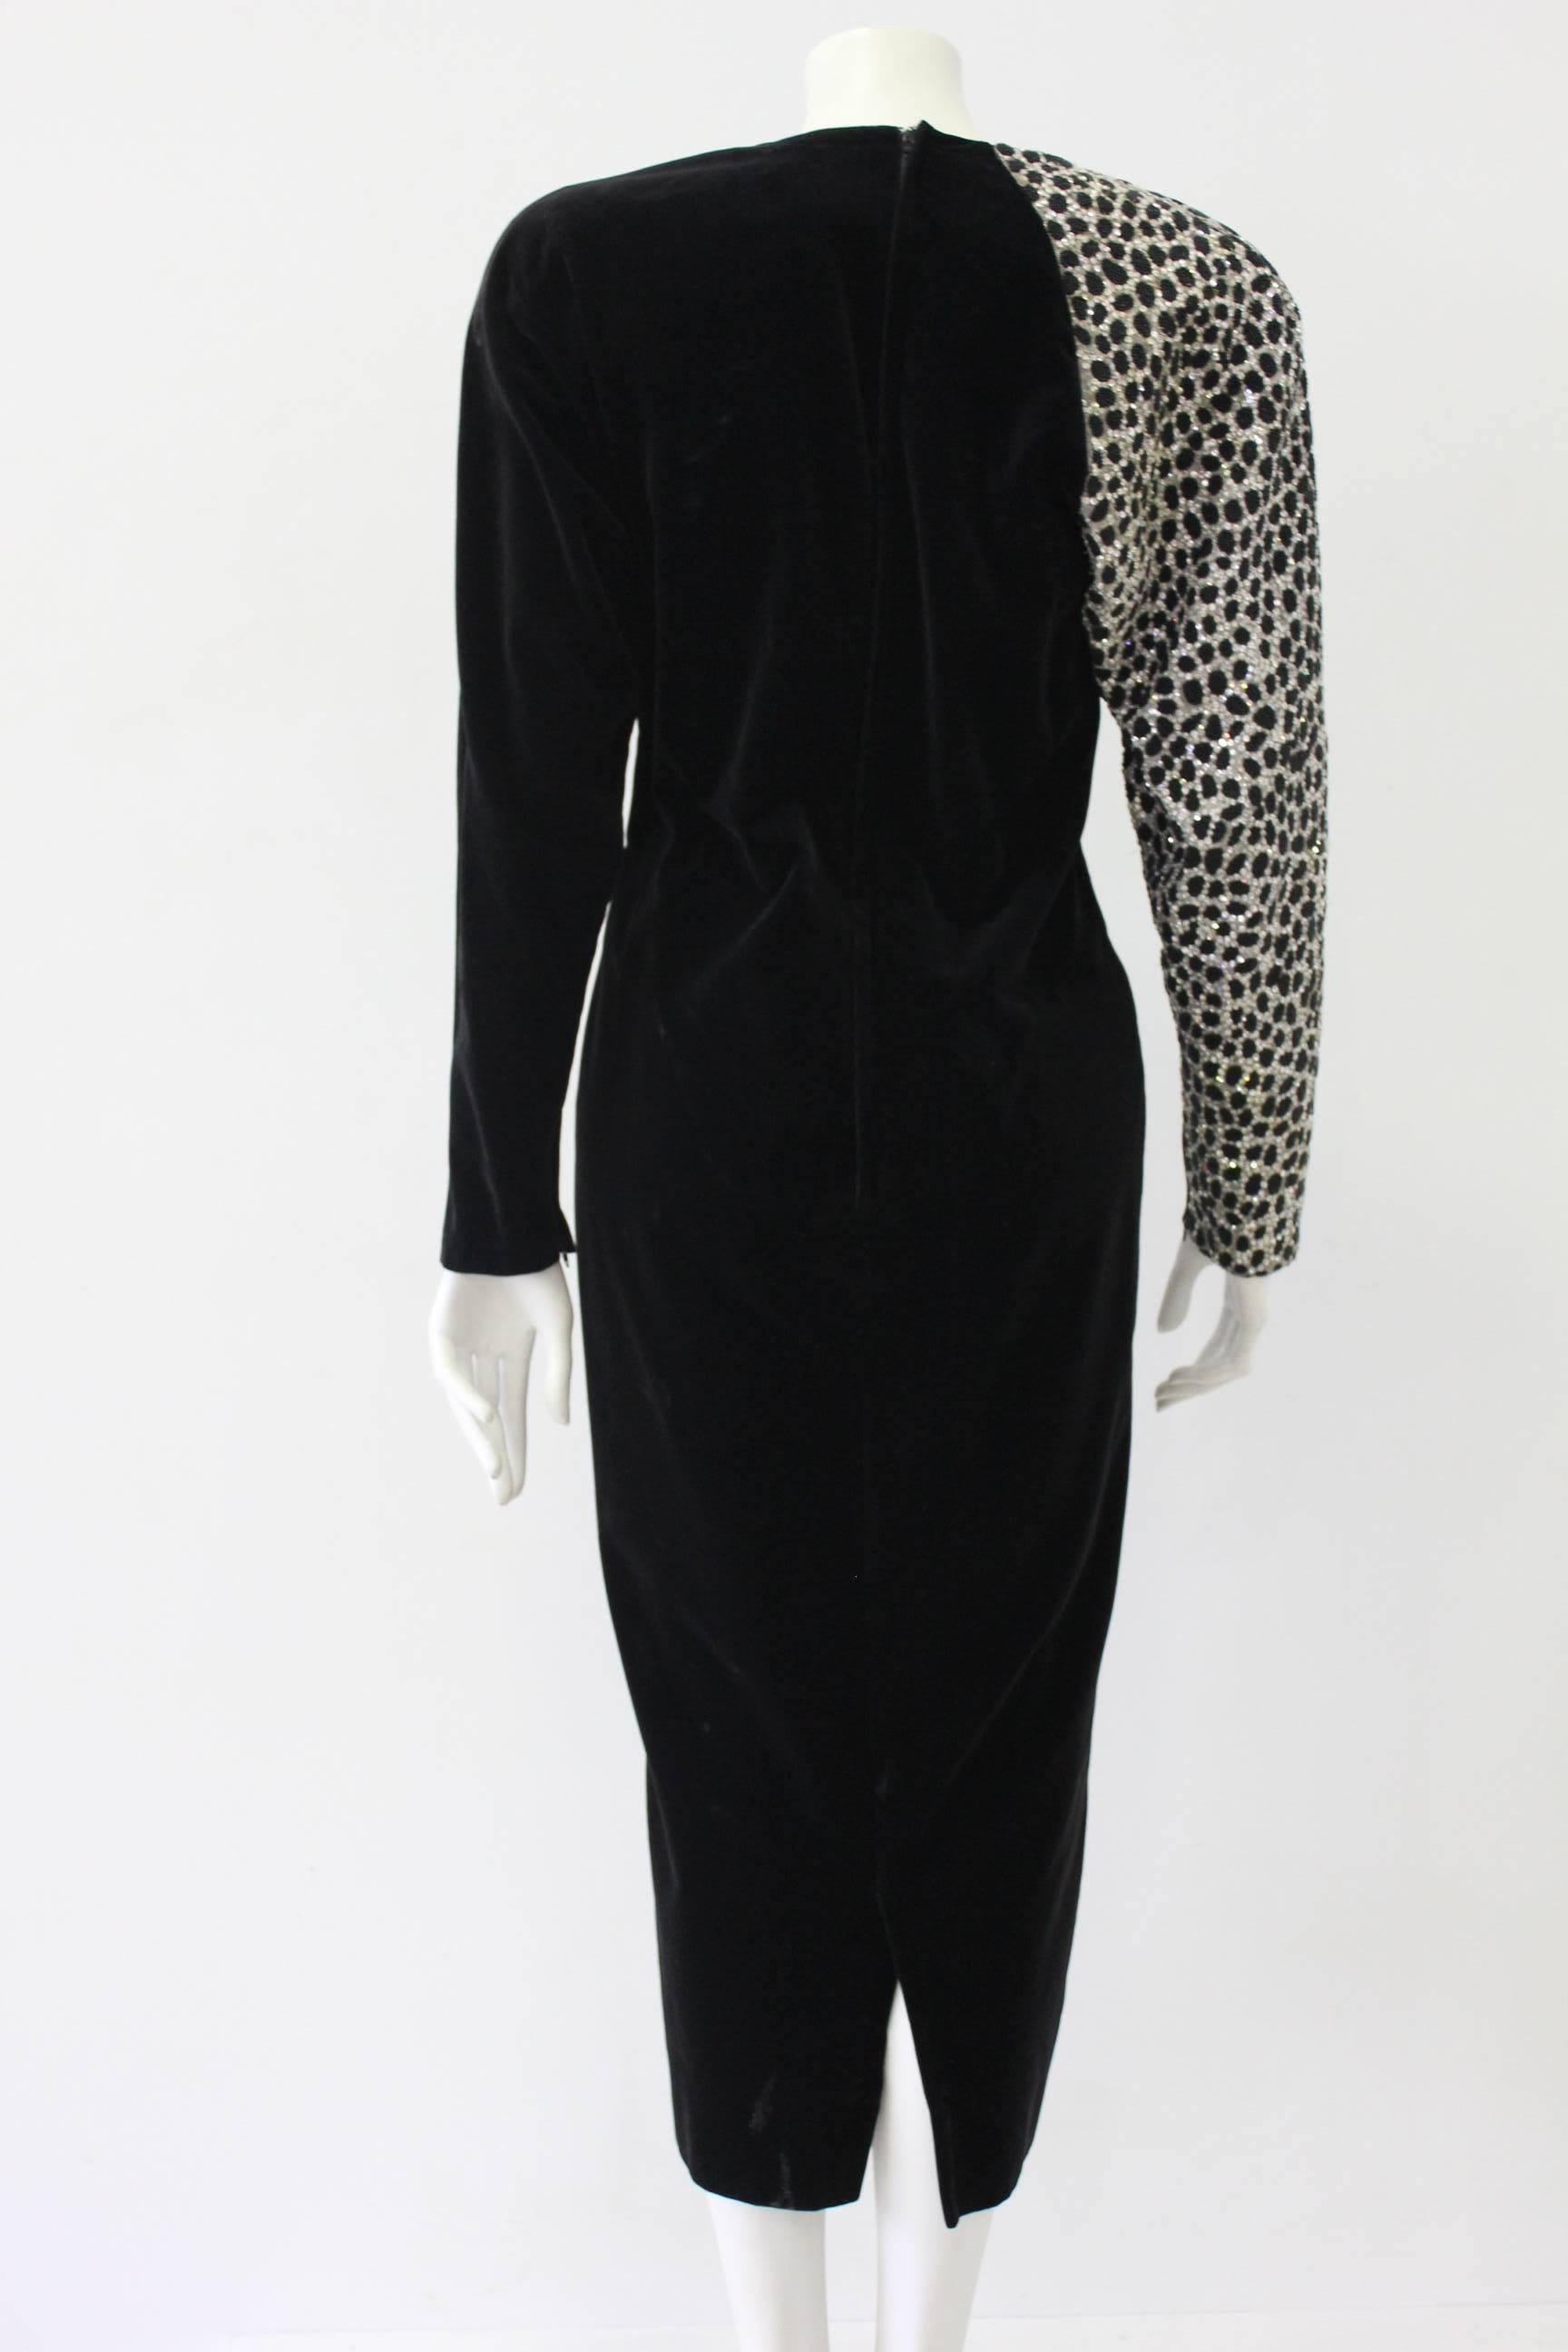 Rare Gianni Versace Velvet Beaded Gown Hand Embroided With Swarovski Crystals 1986